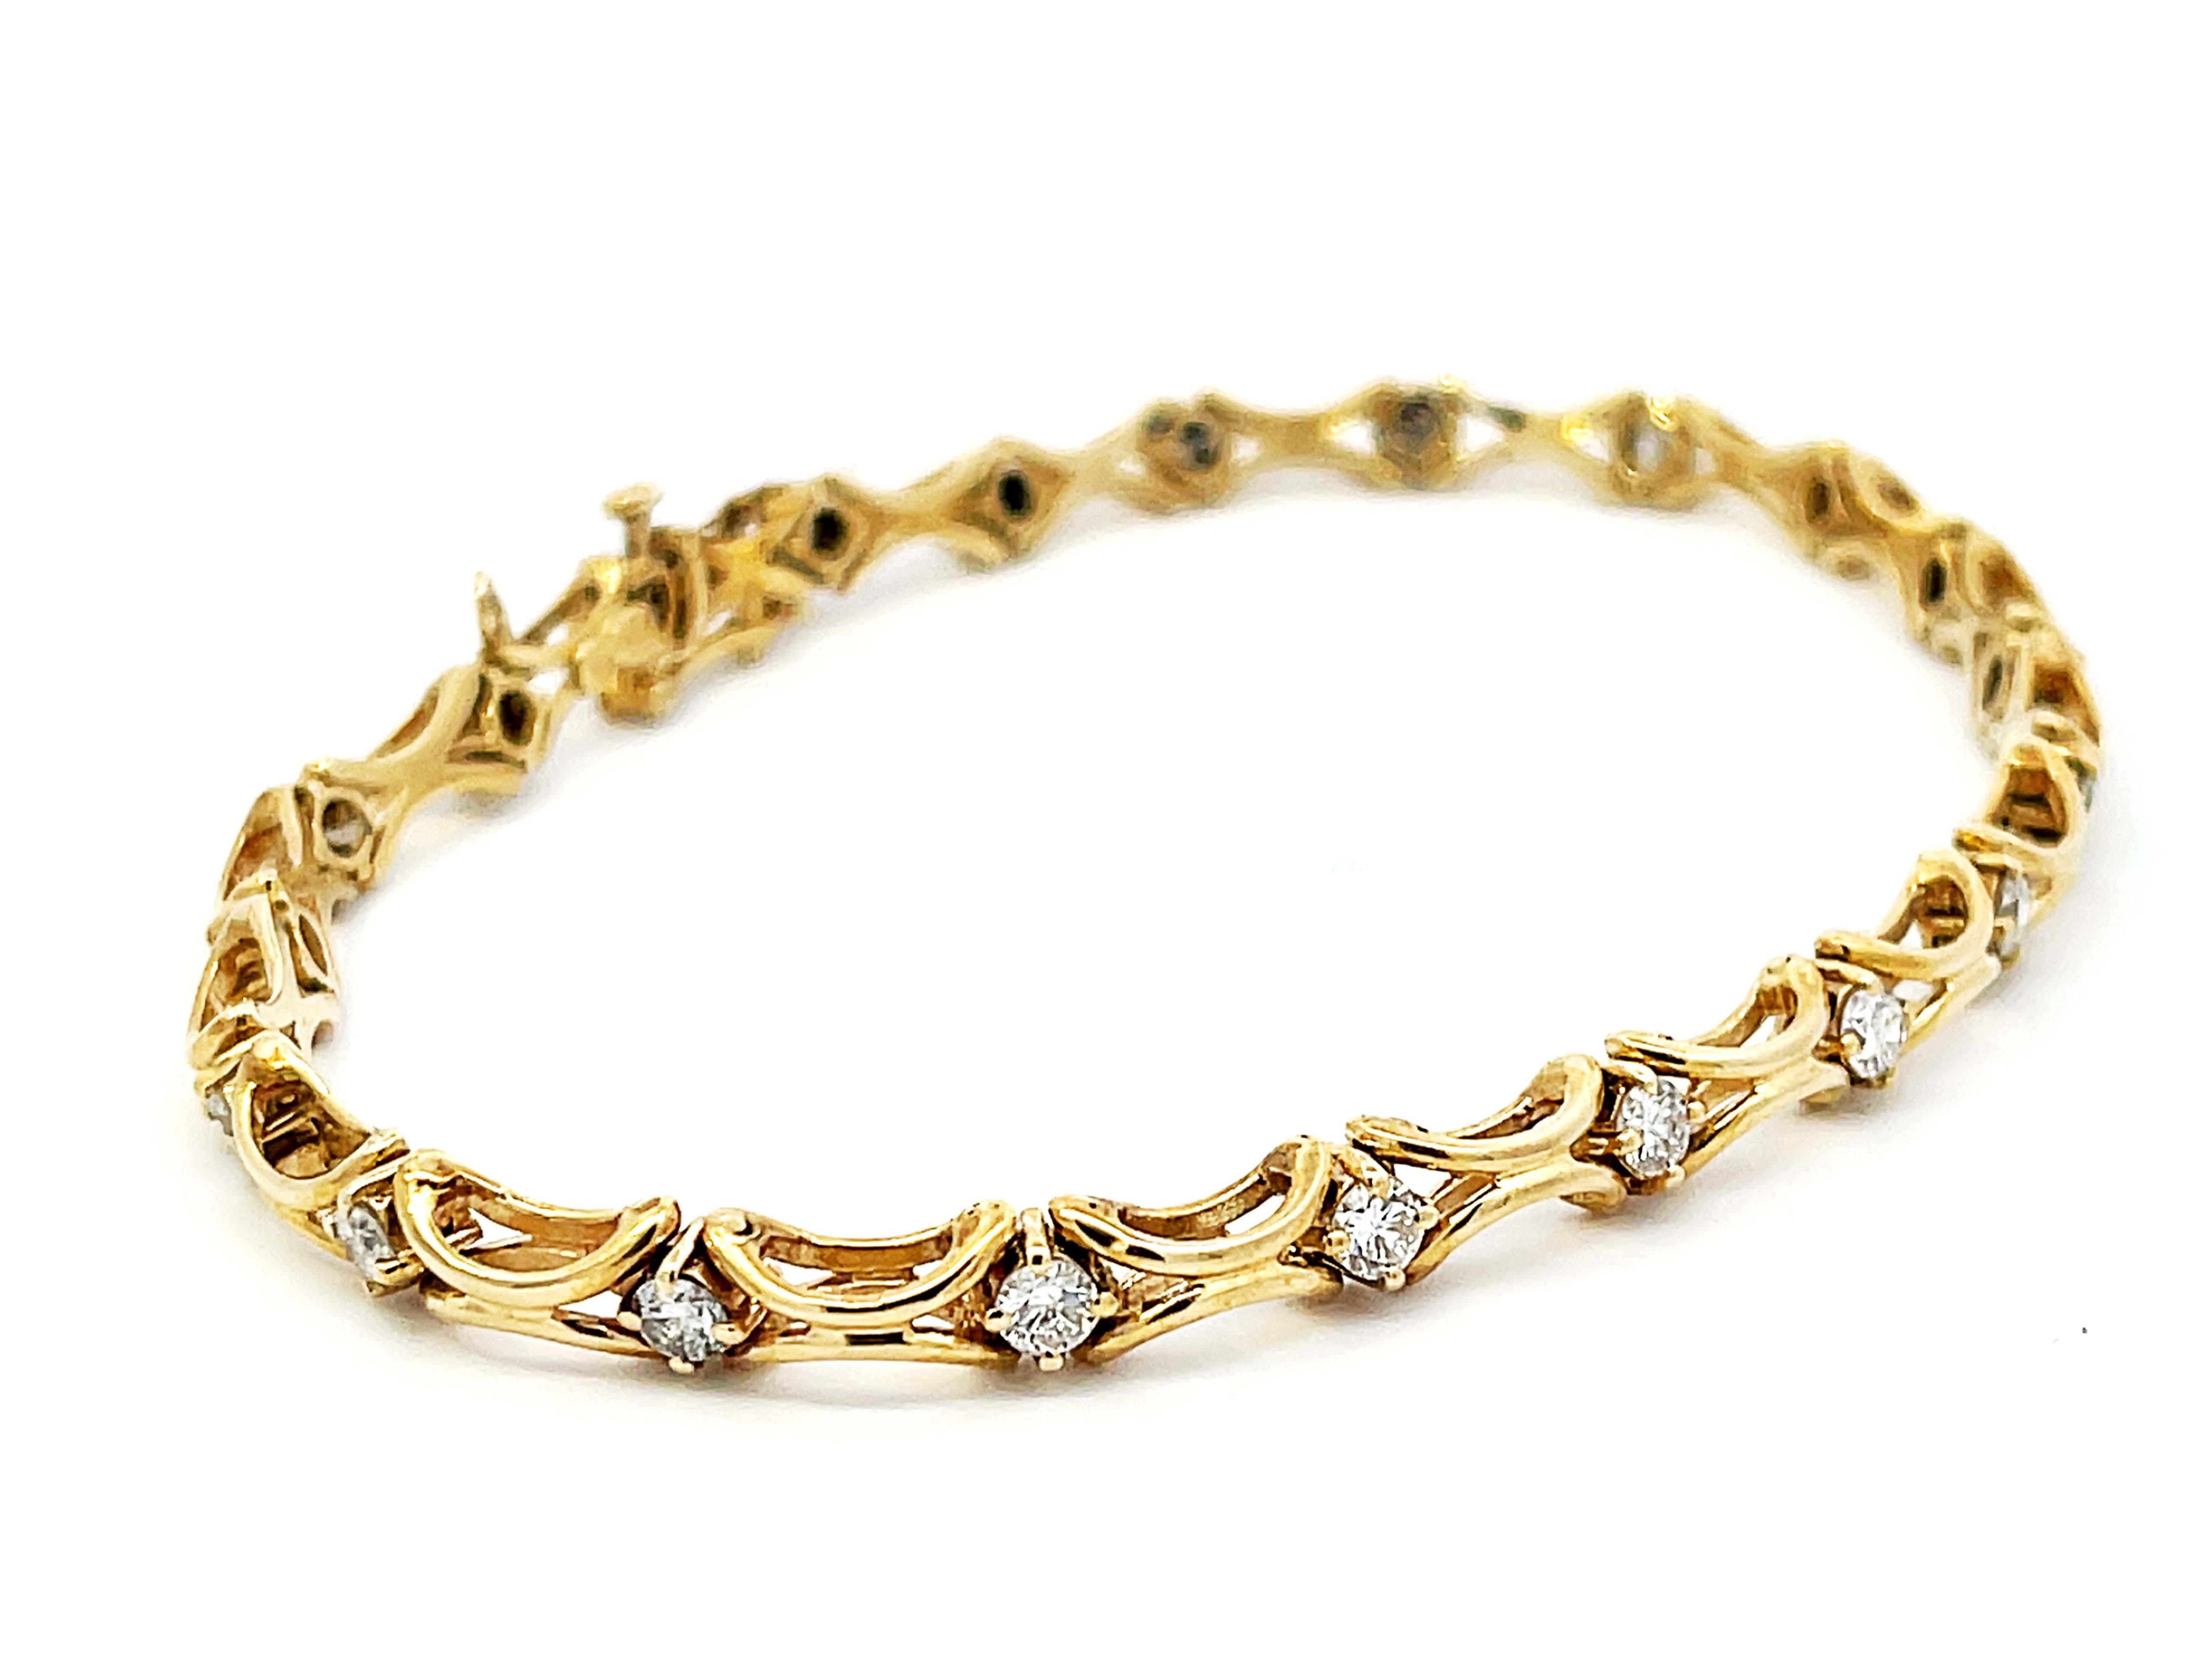 Diamond Link Bracelet in 14k Yellow Gold In Excellent Condition For Sale In Honolulu, HI